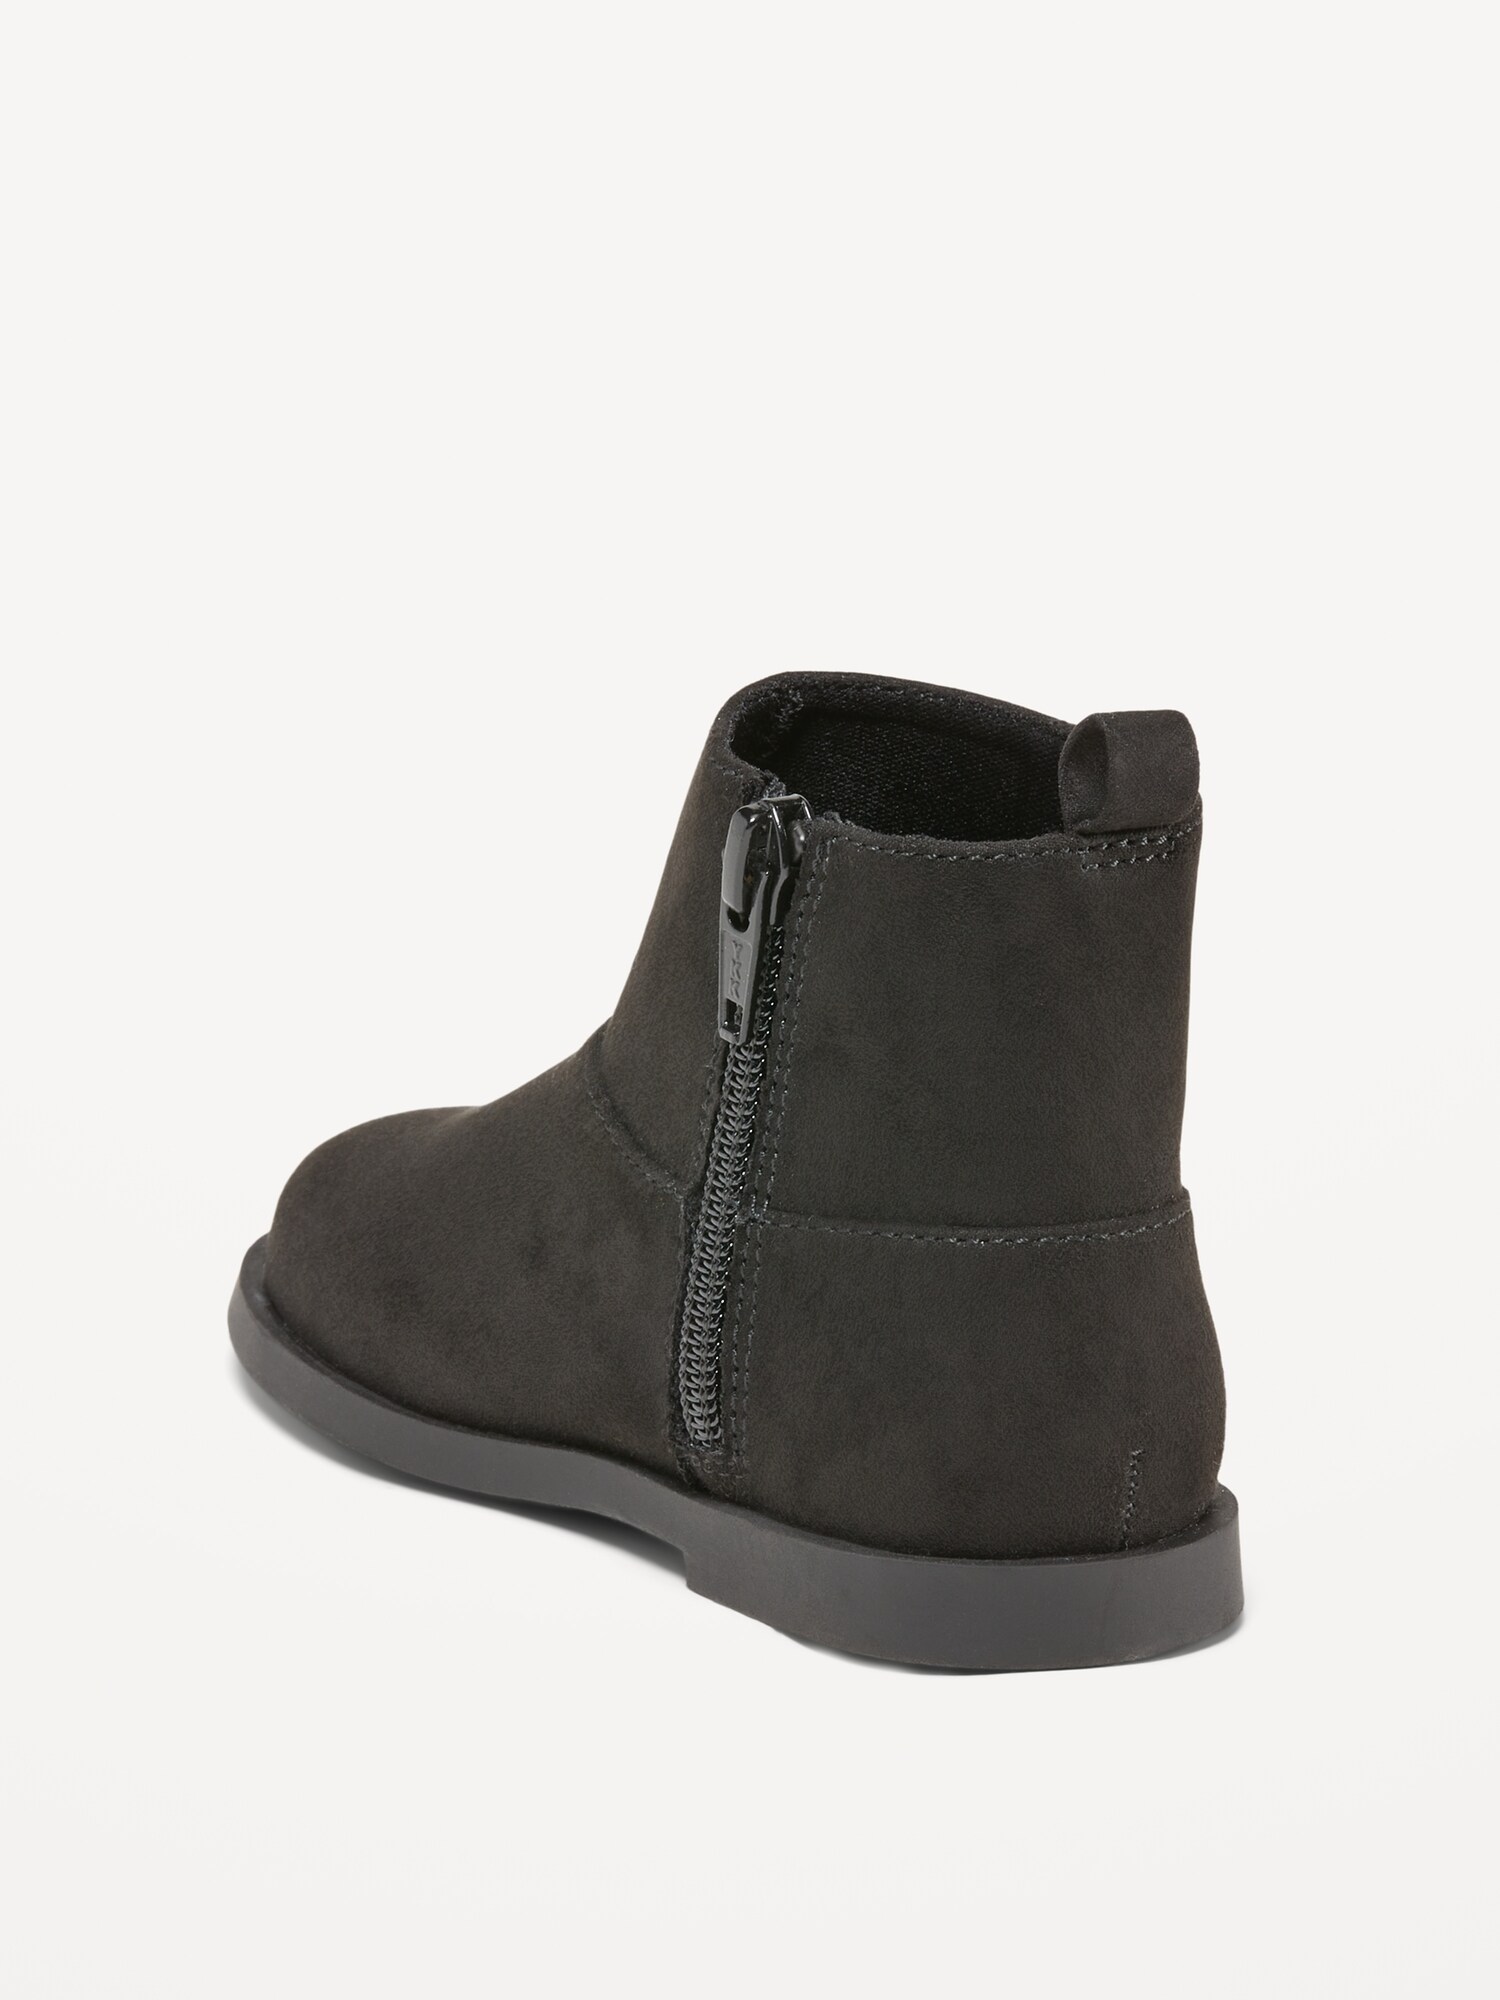 Faux-Suede Side-Zip Ankle Boots for Toddler Girls | Old Navy